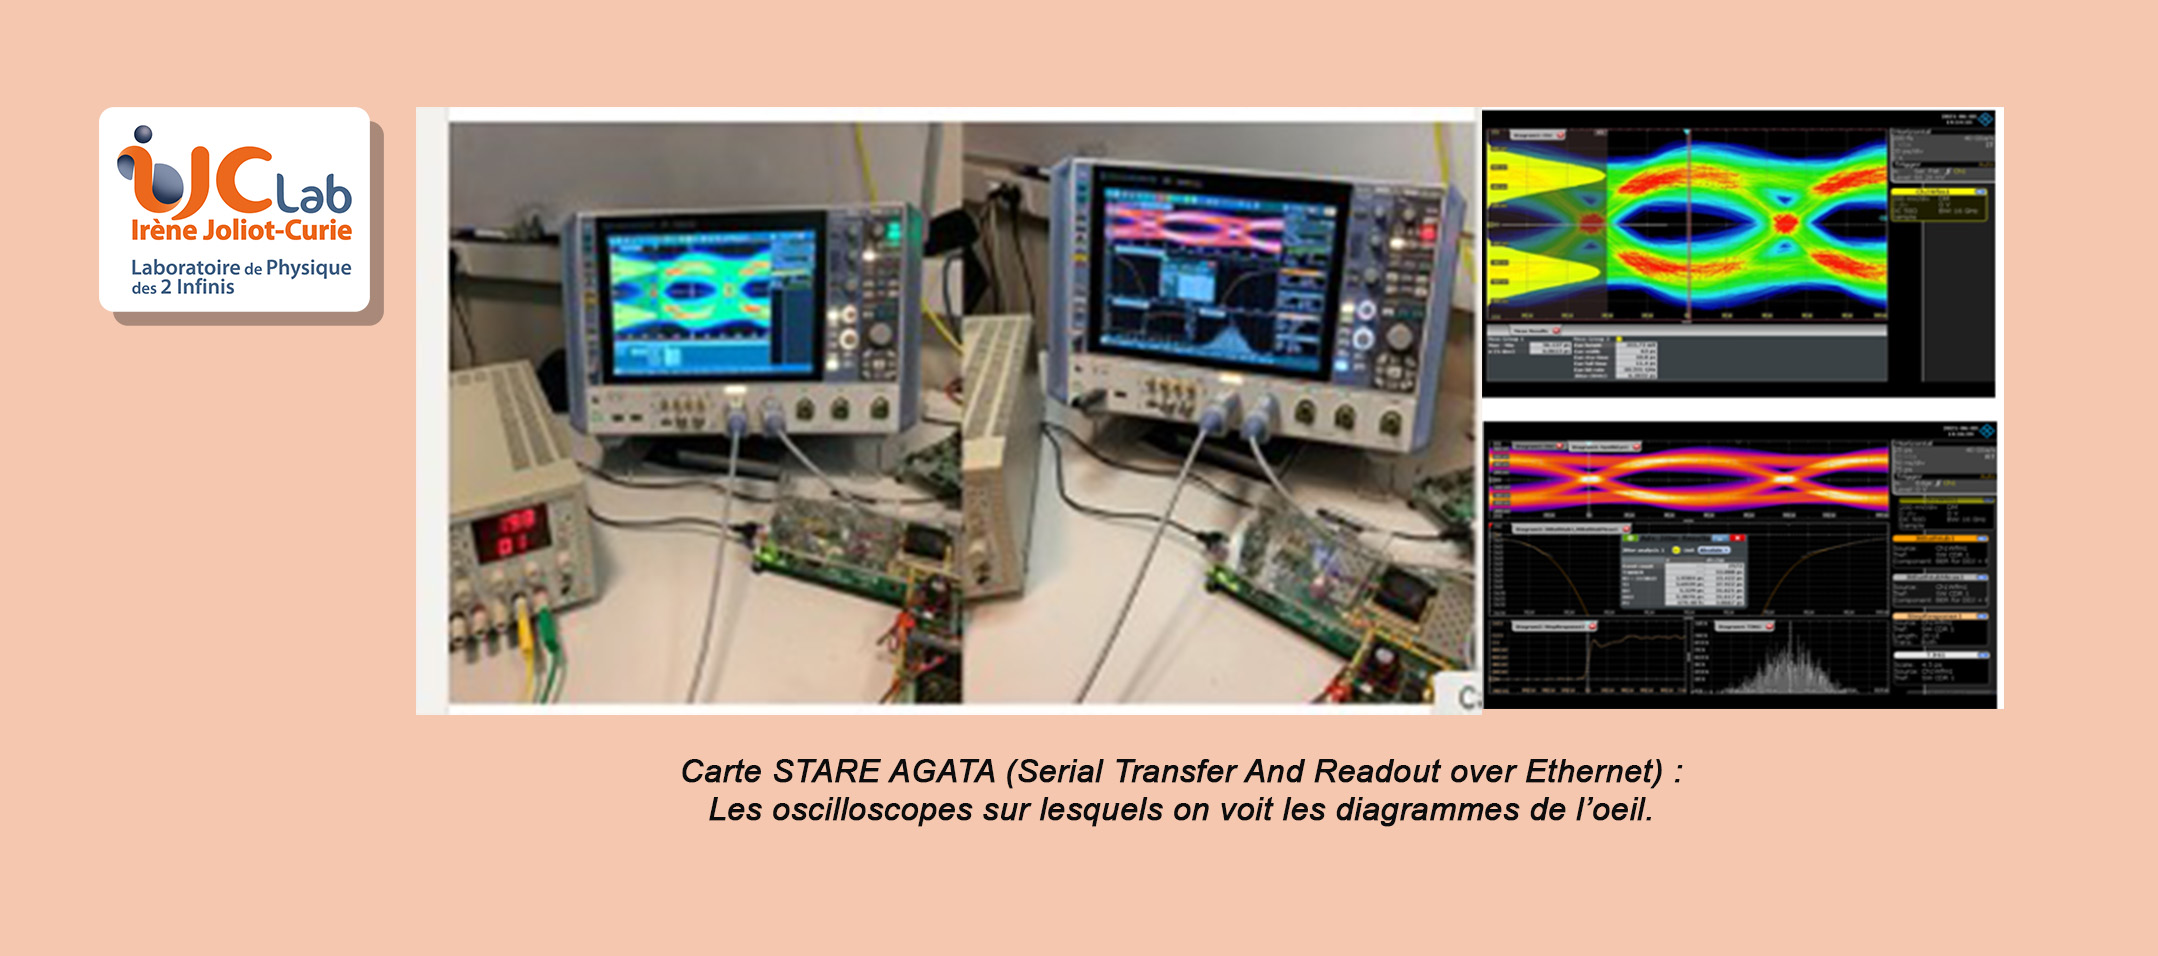 The STARE electronic card validated for AGATA